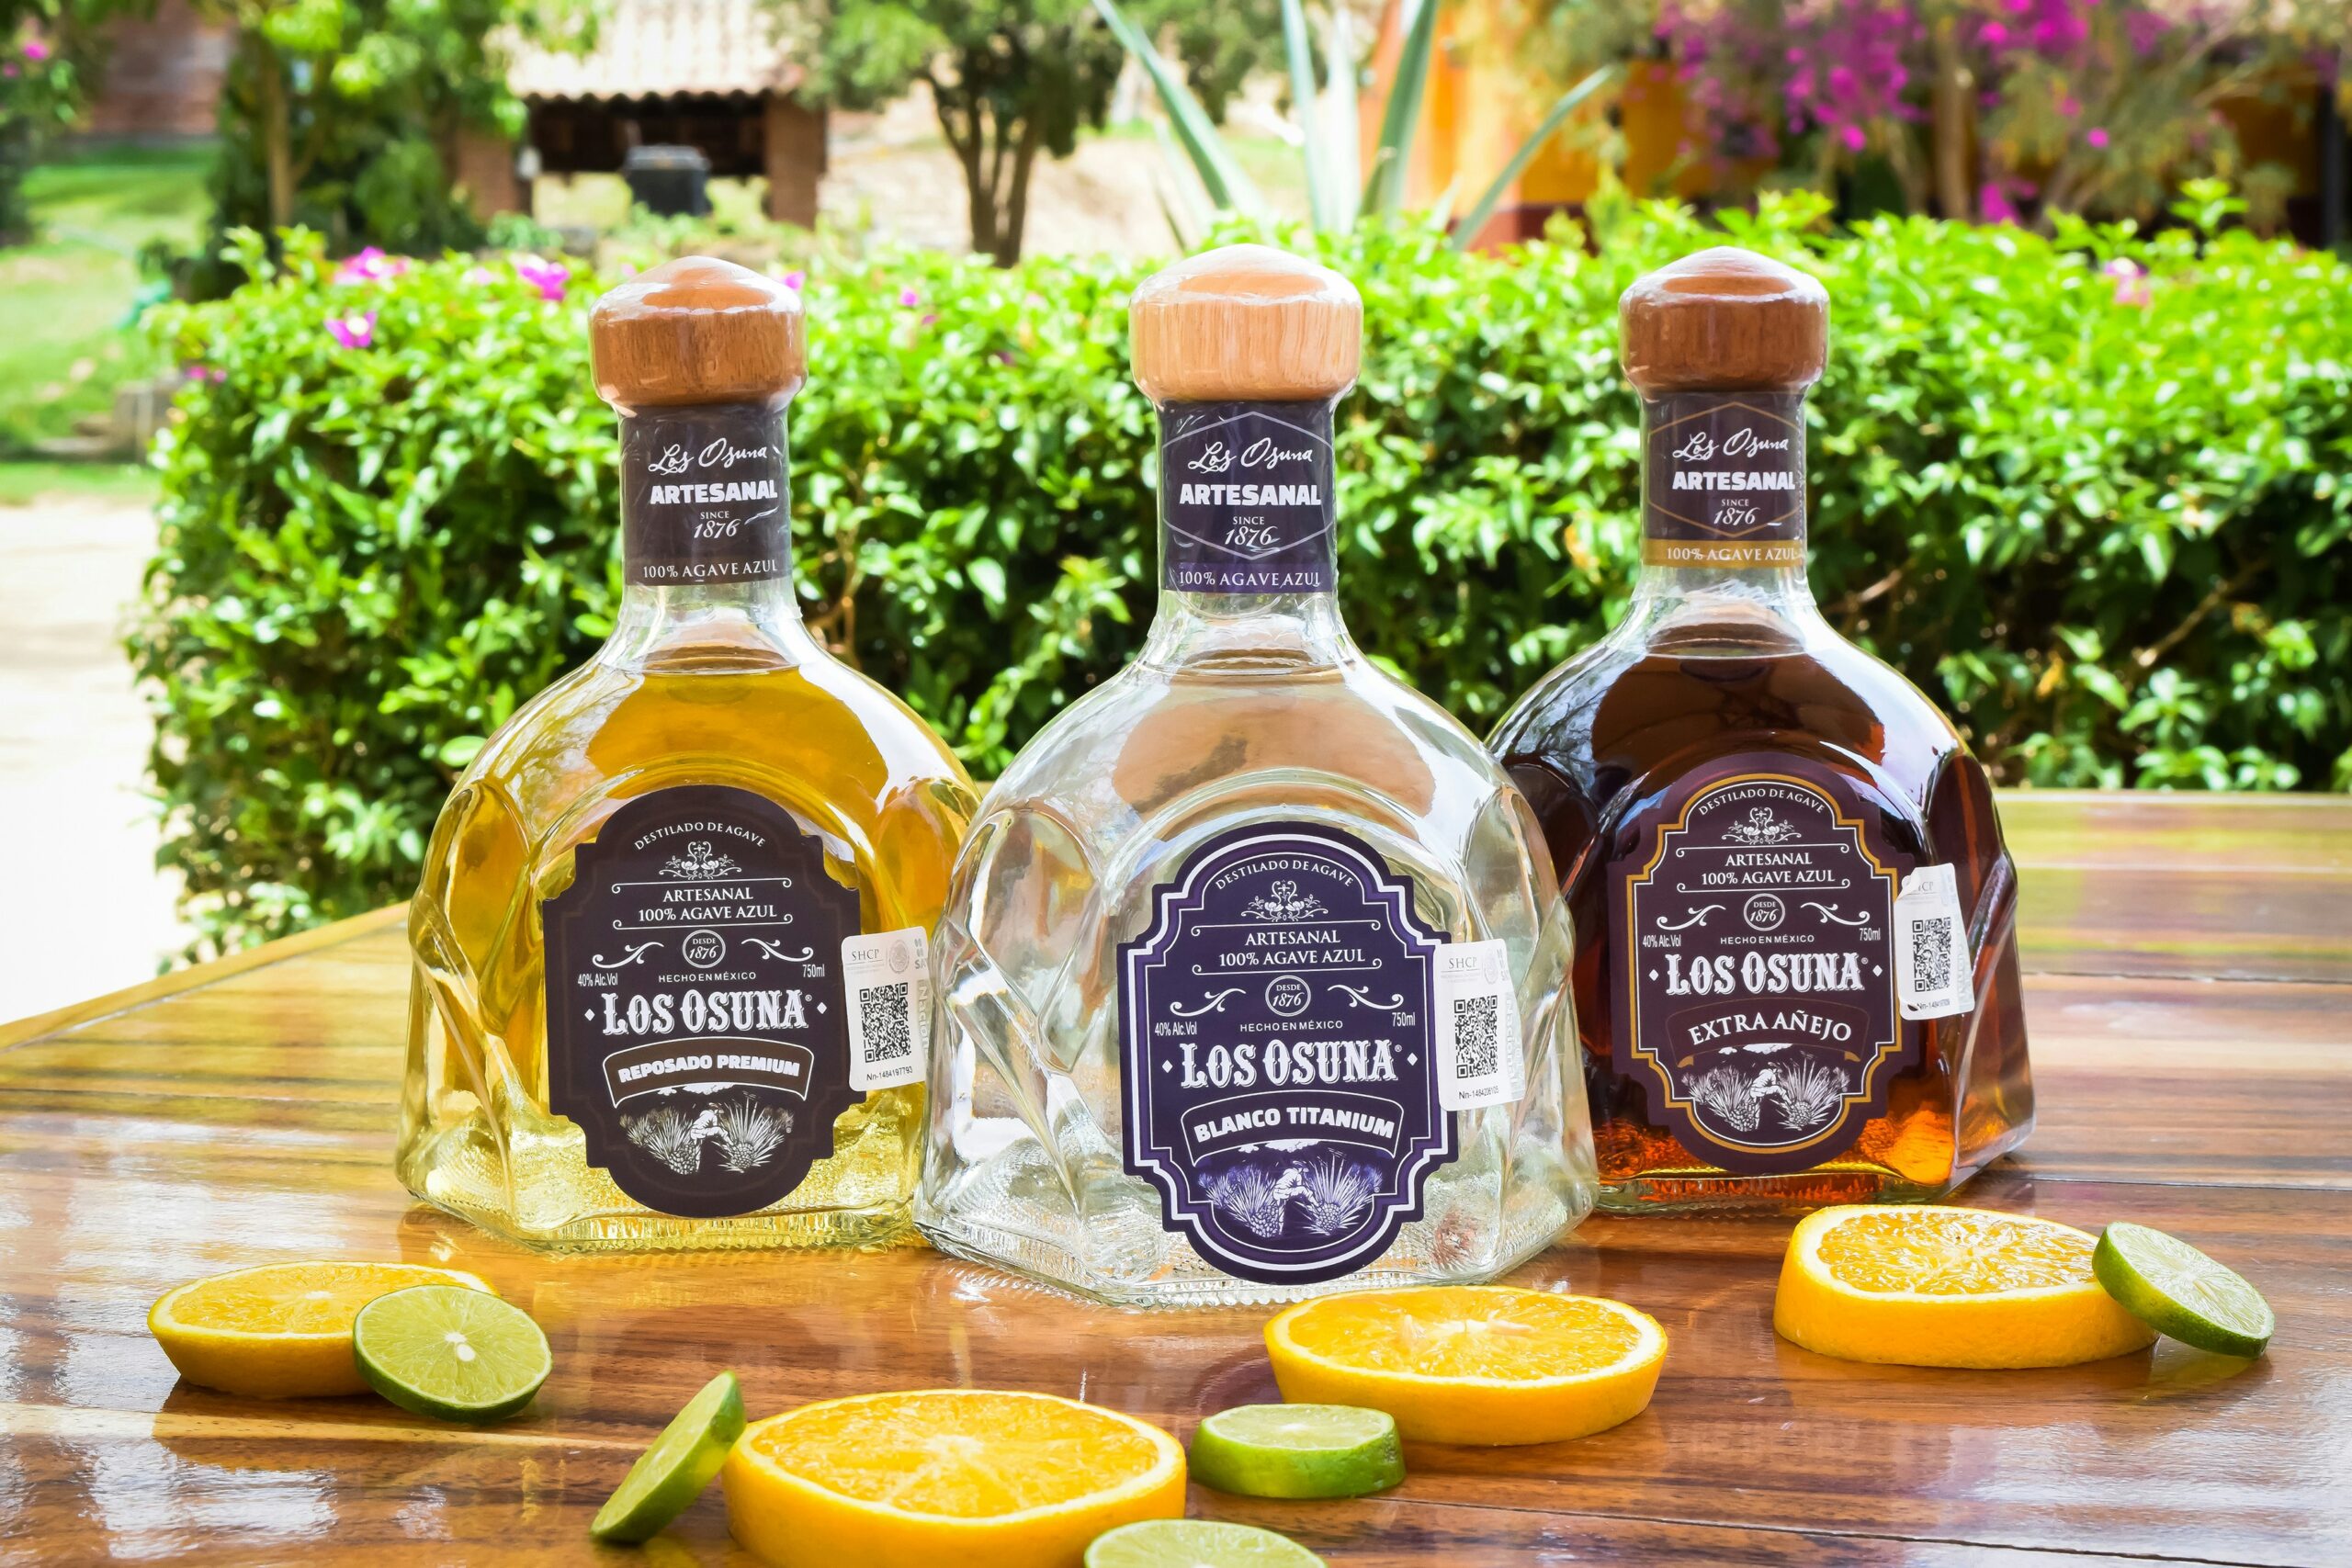 Añejo is a type of aged tequila that is a golden color. Pictured: Bottles of Tequila